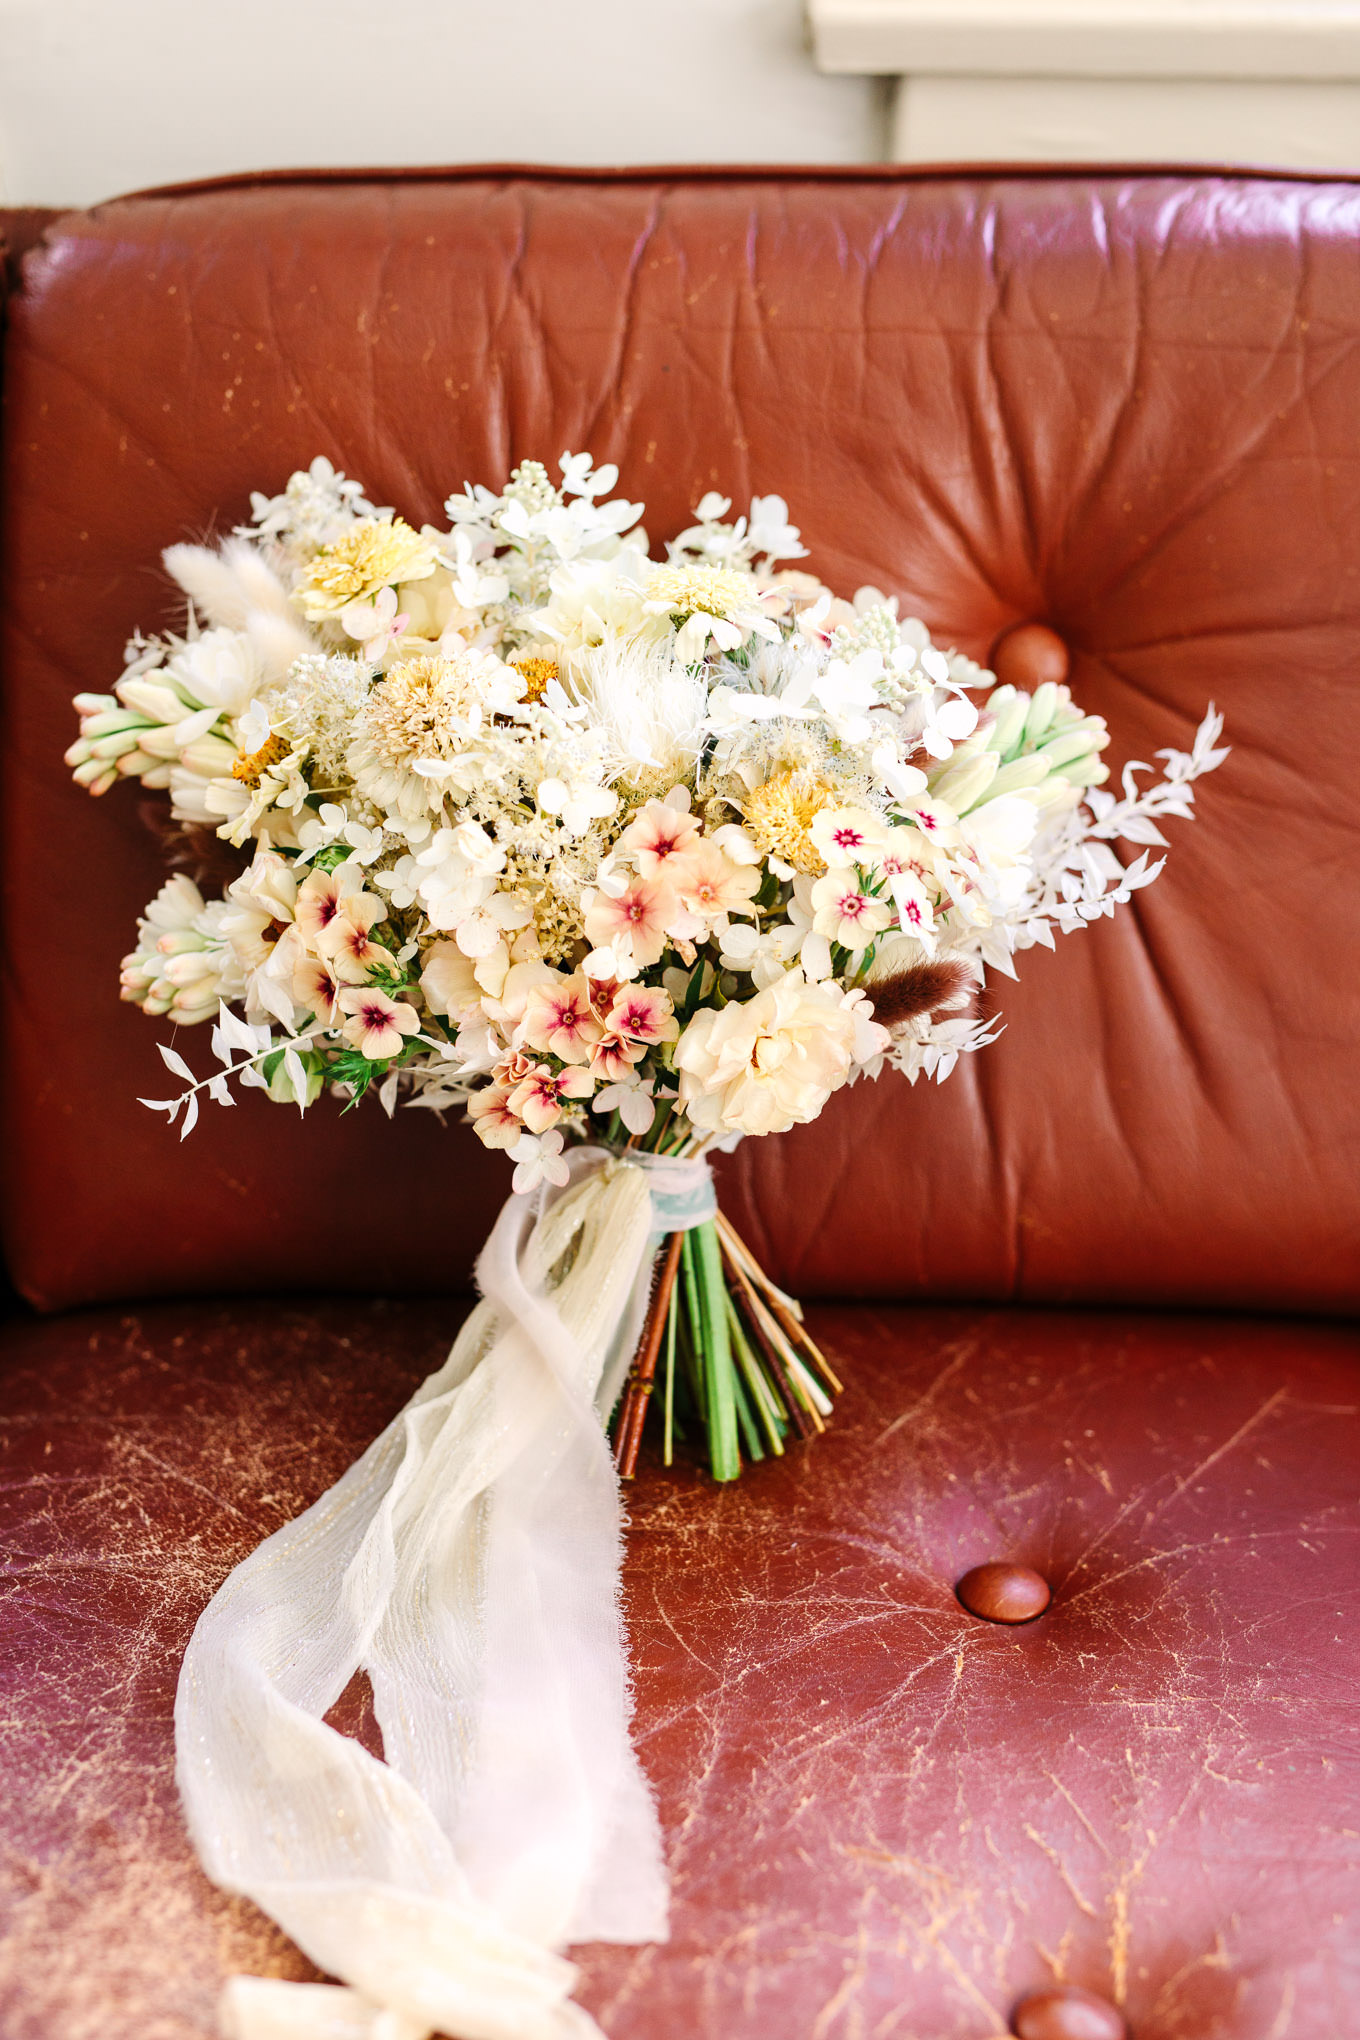 Neutral boho bridal bouquet by Shindig Chic | Los Angeles Arboretum Elopement | Colorful and elevated wedding photography for fun-loving couples in Southern California | #LosAngelesElopement #elopement #LAarboretum #LAskyline #elopementphotos   Source: Mary Costa Photography | Los Angeles